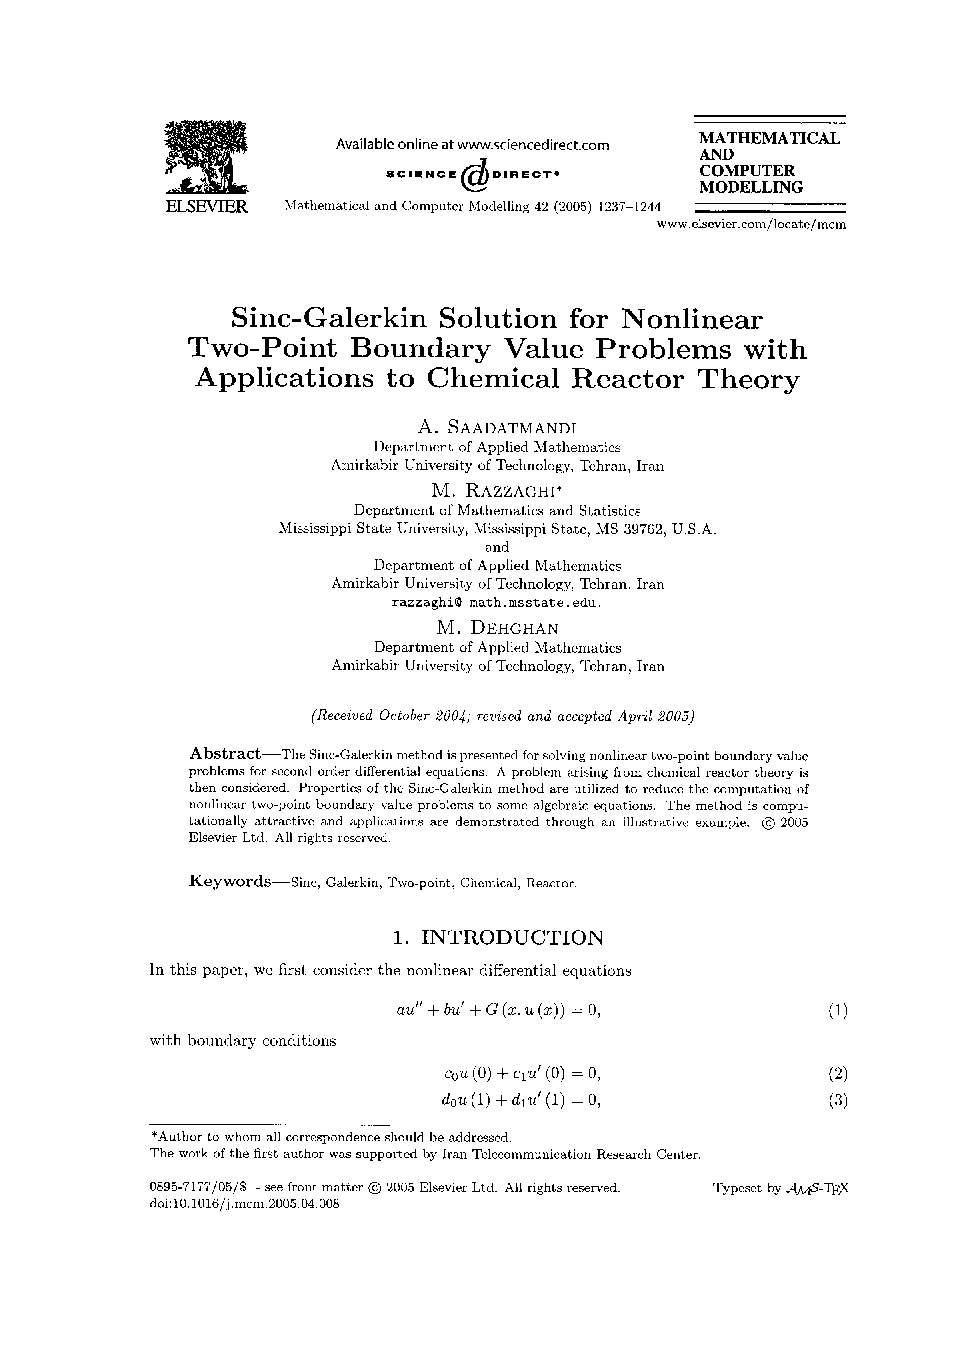 Sinc-galerkin solution for nonlinear two-point boundary value problems with applications to chemical reactor theory